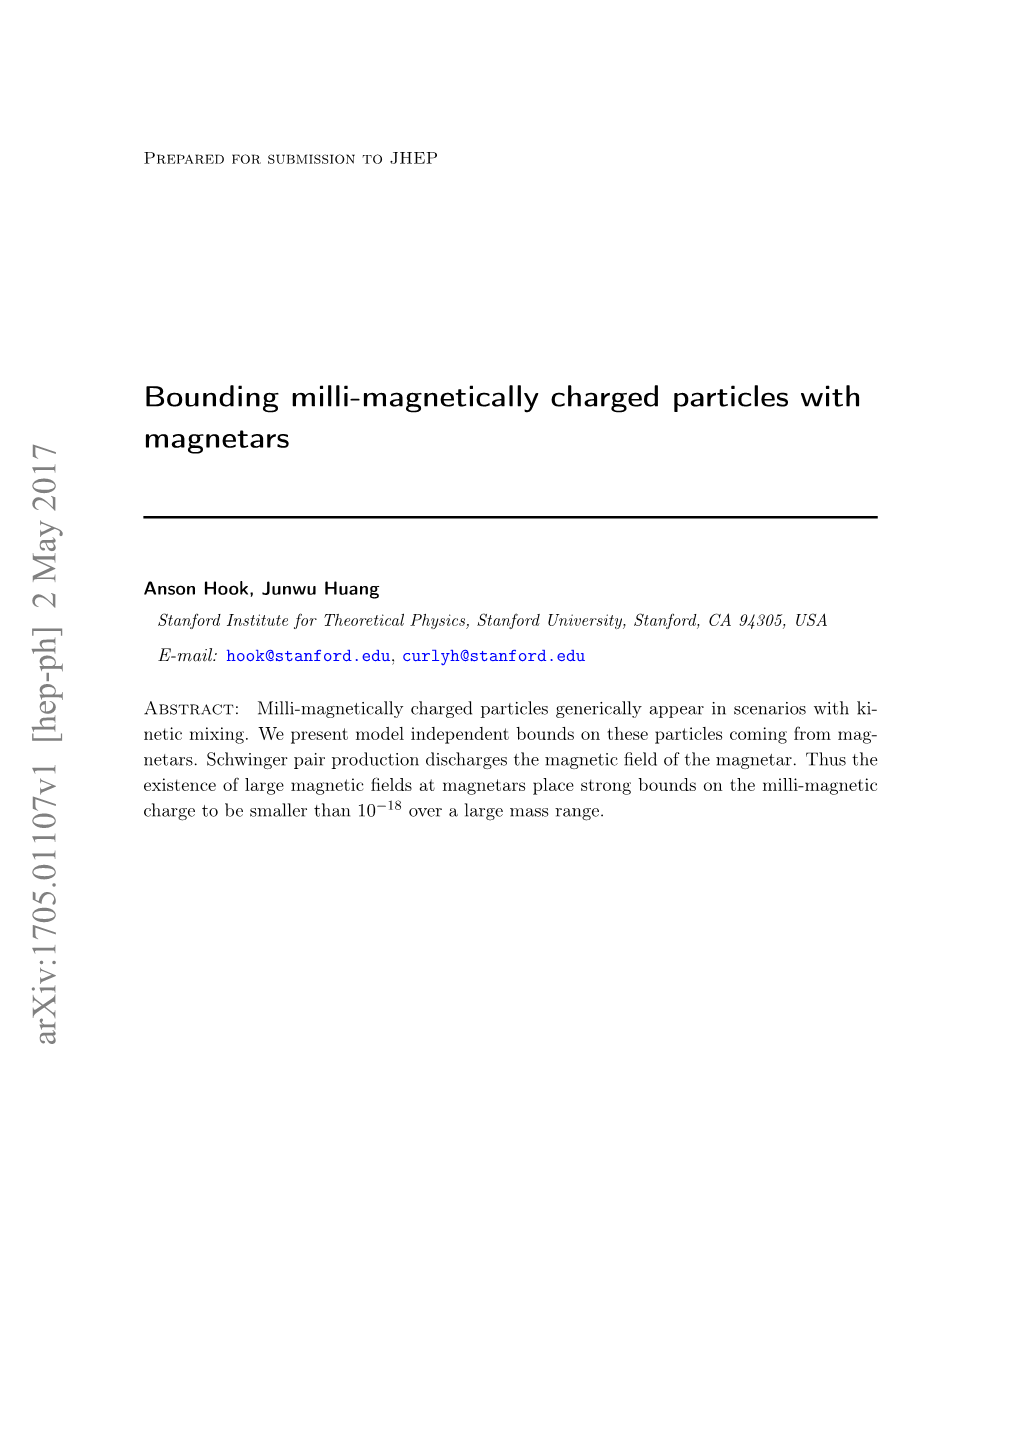 Bounding Milli-Magnetically Charged Particles with Magnetars